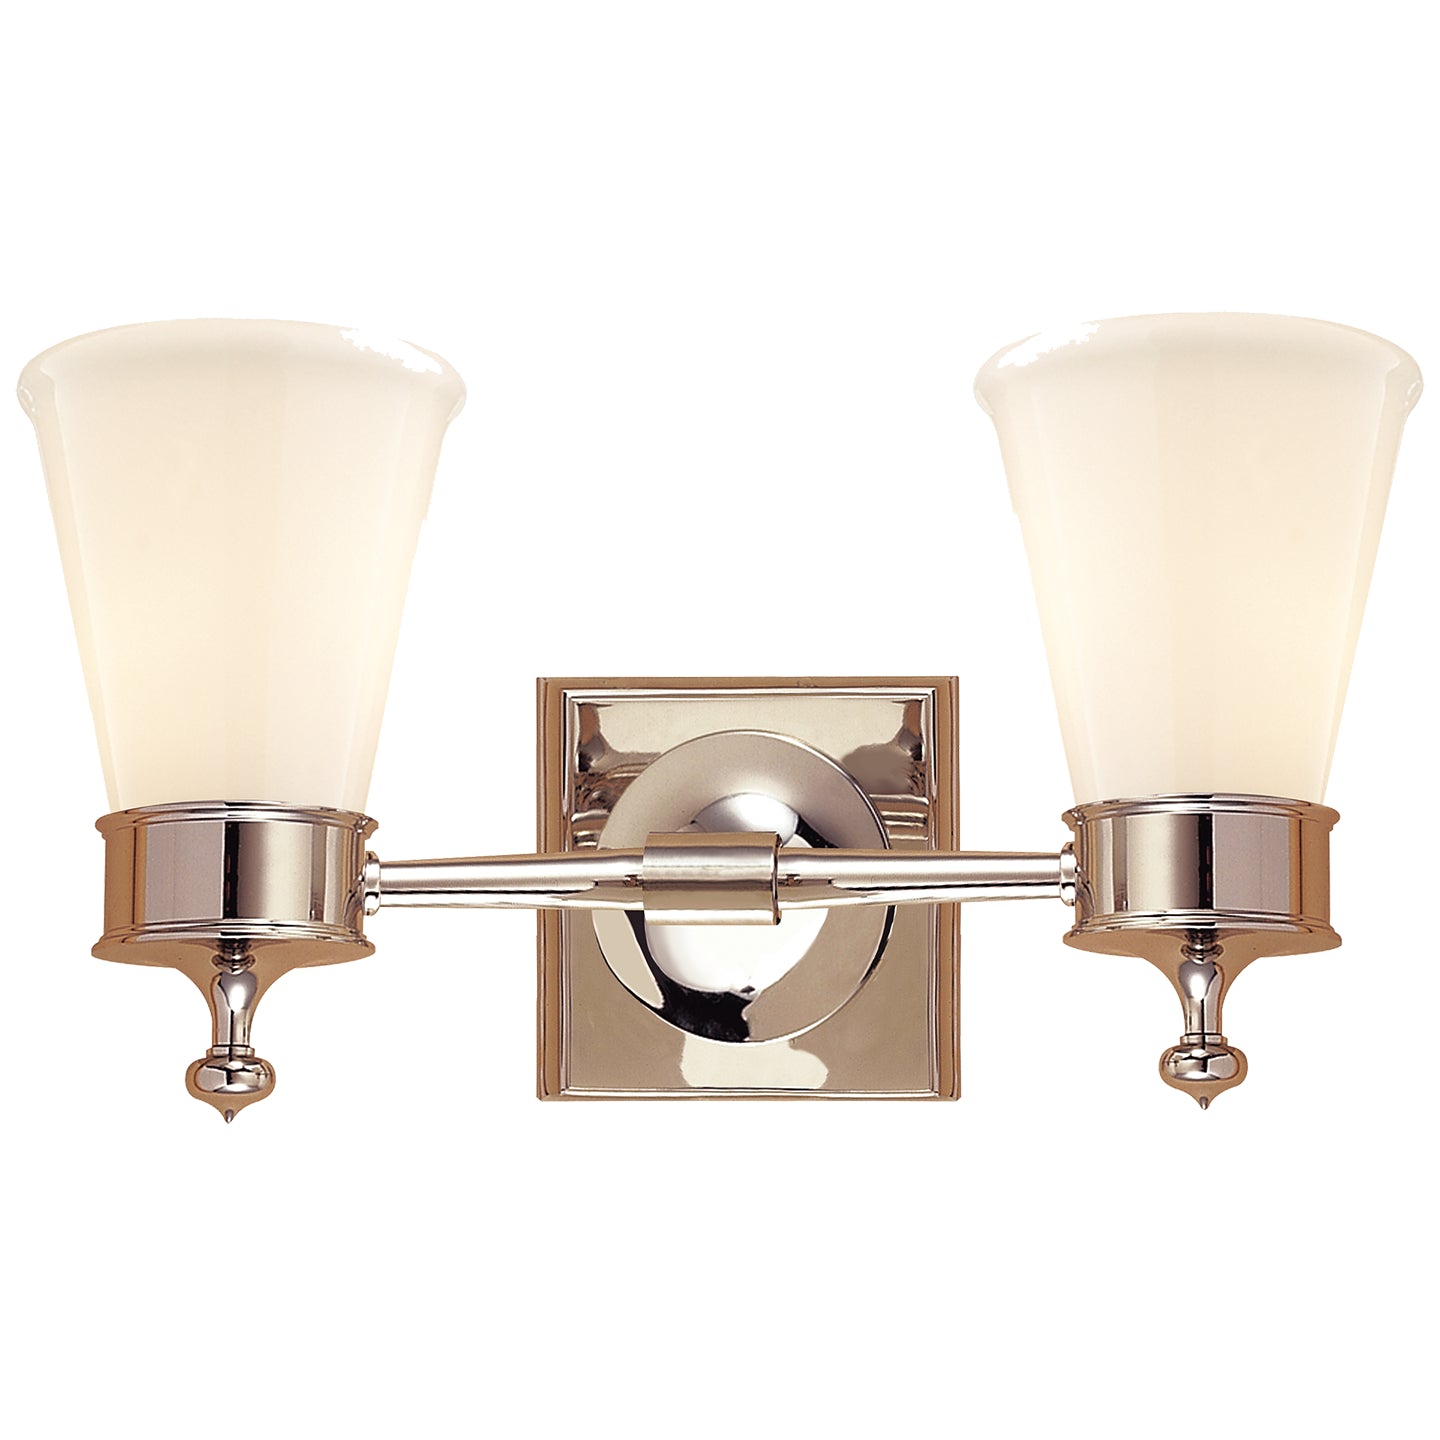 Visual Comfort Signature - SS 2002PN-WG - Two Light Wall Sconce - Siena - Polished Nickel